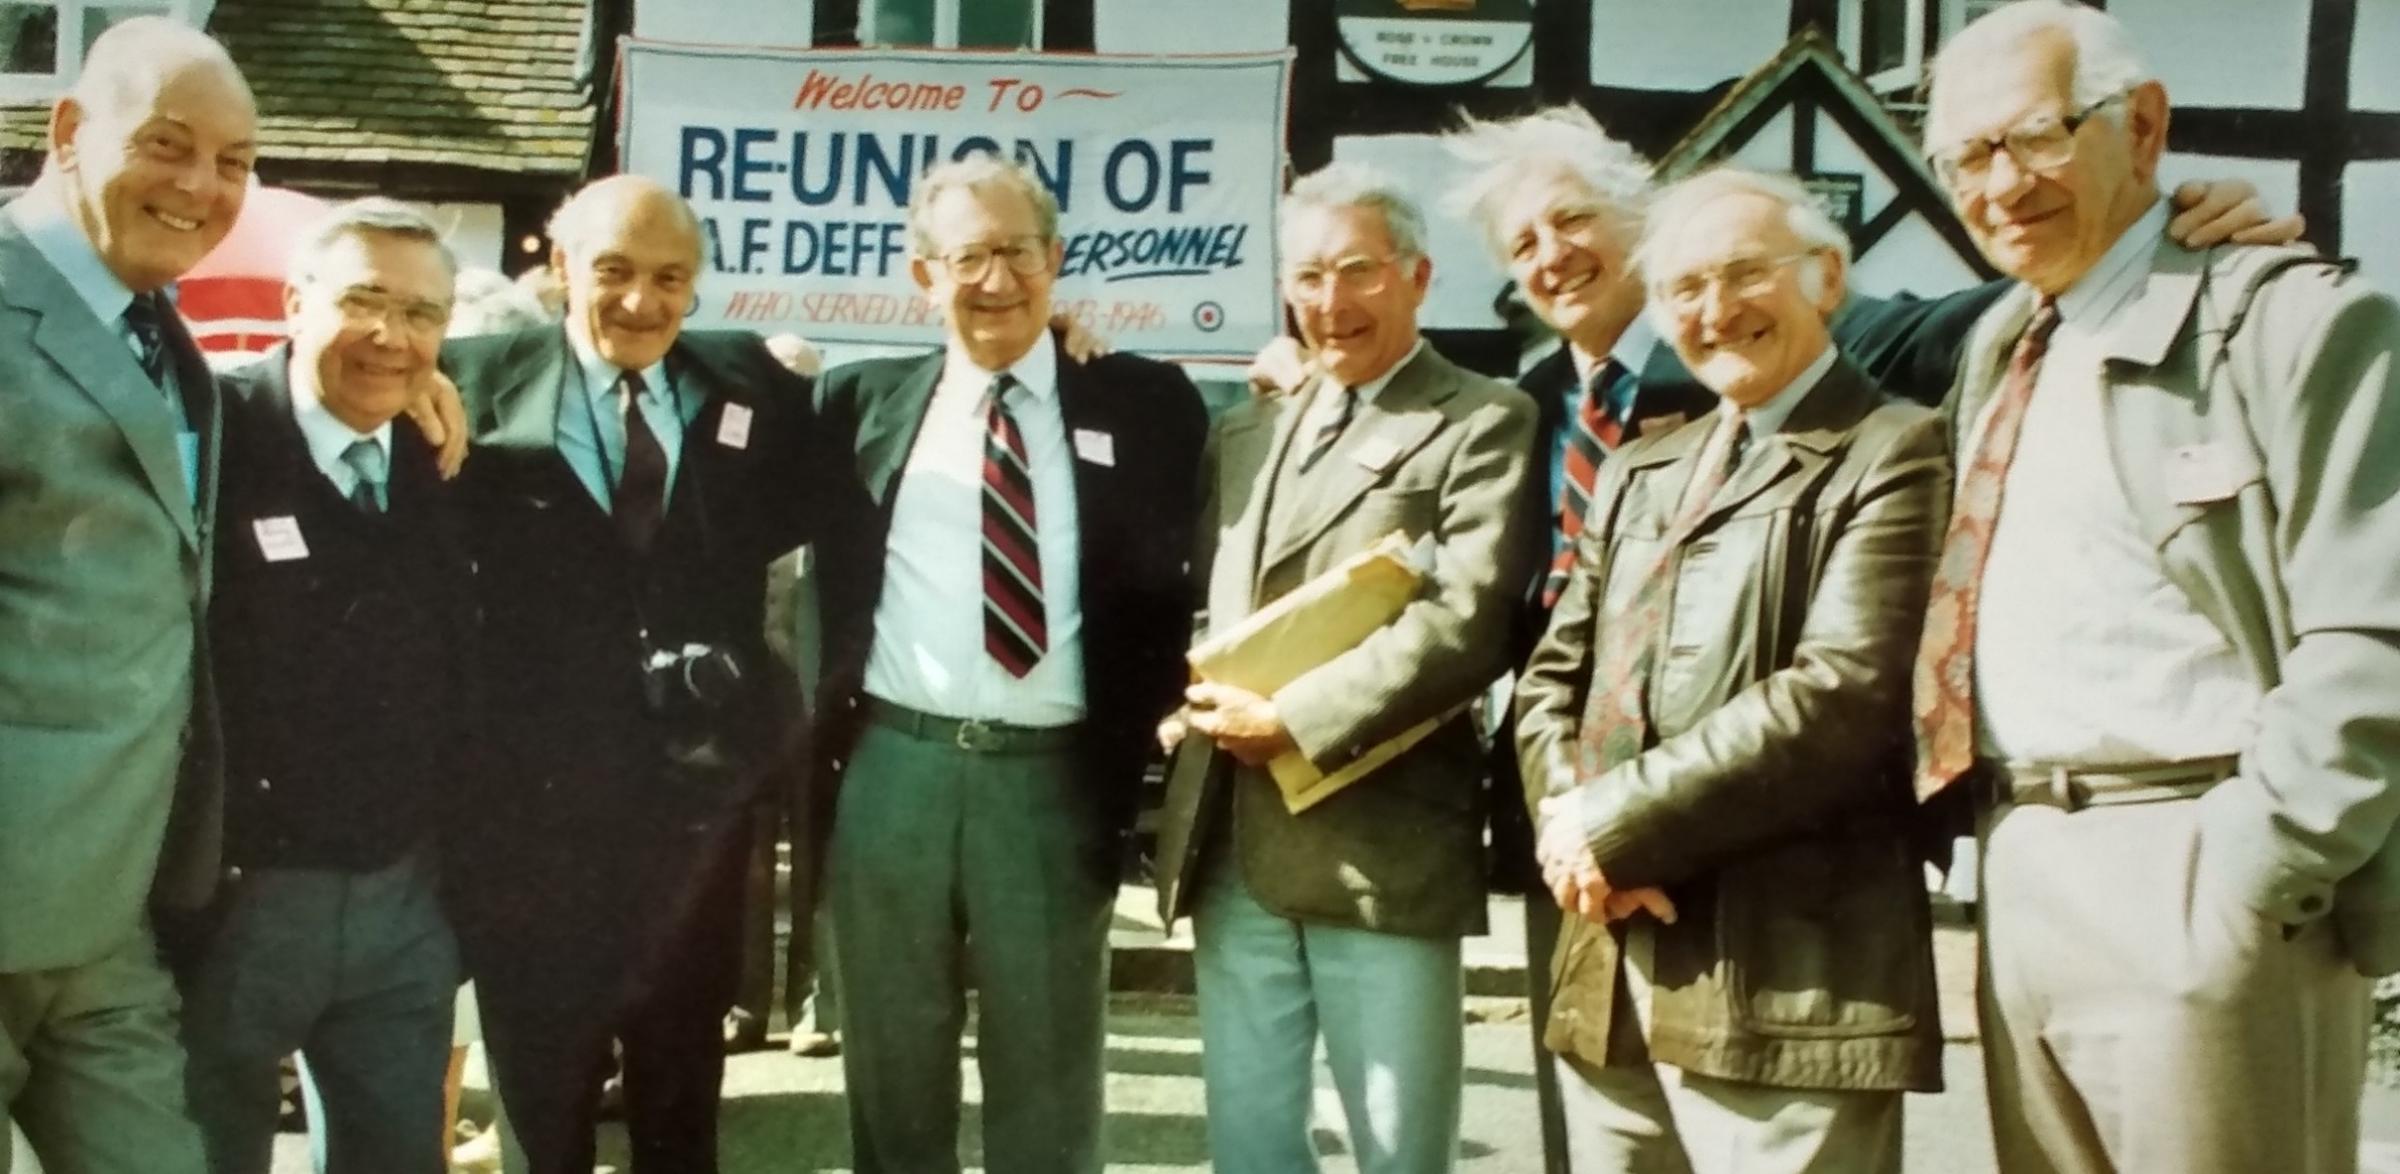 September 1992 saw a reunion of Second World War veterans at RAF Defford. Pictured are members of A Flight